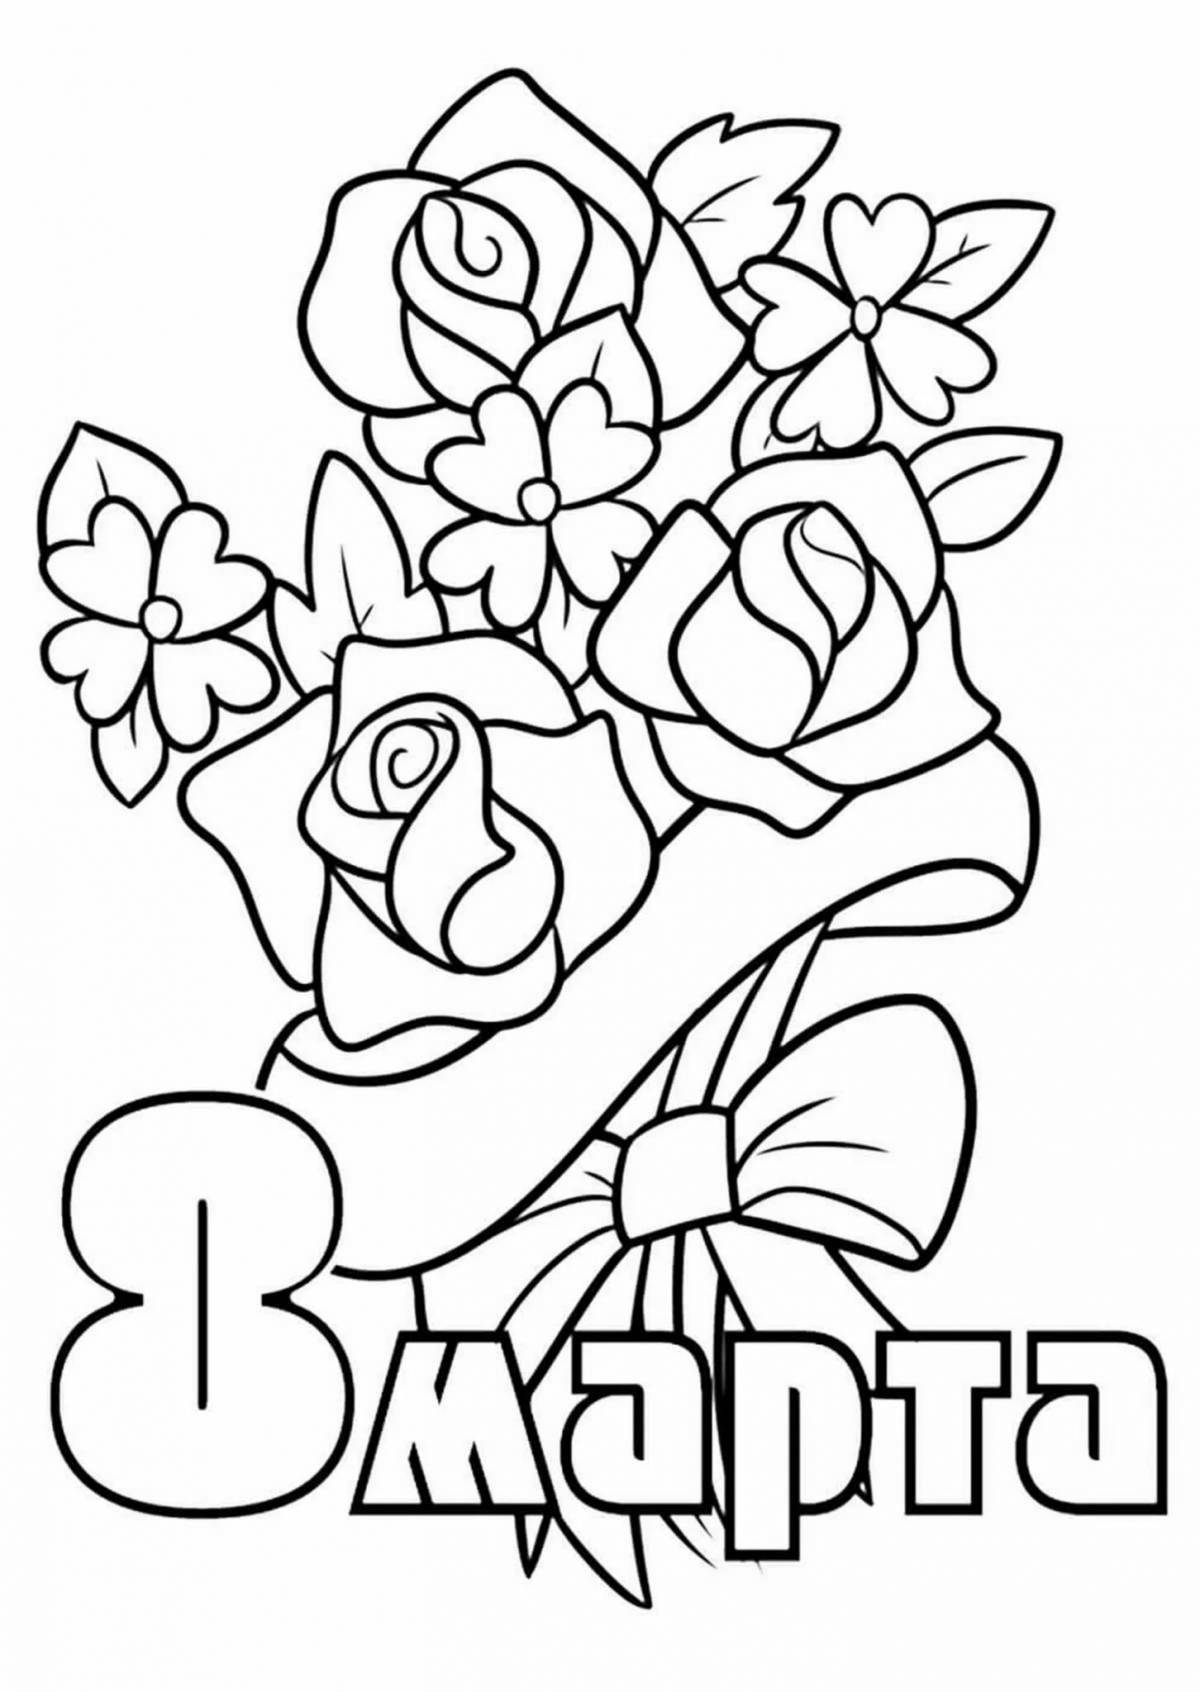 Decorated coloring page for March 8th